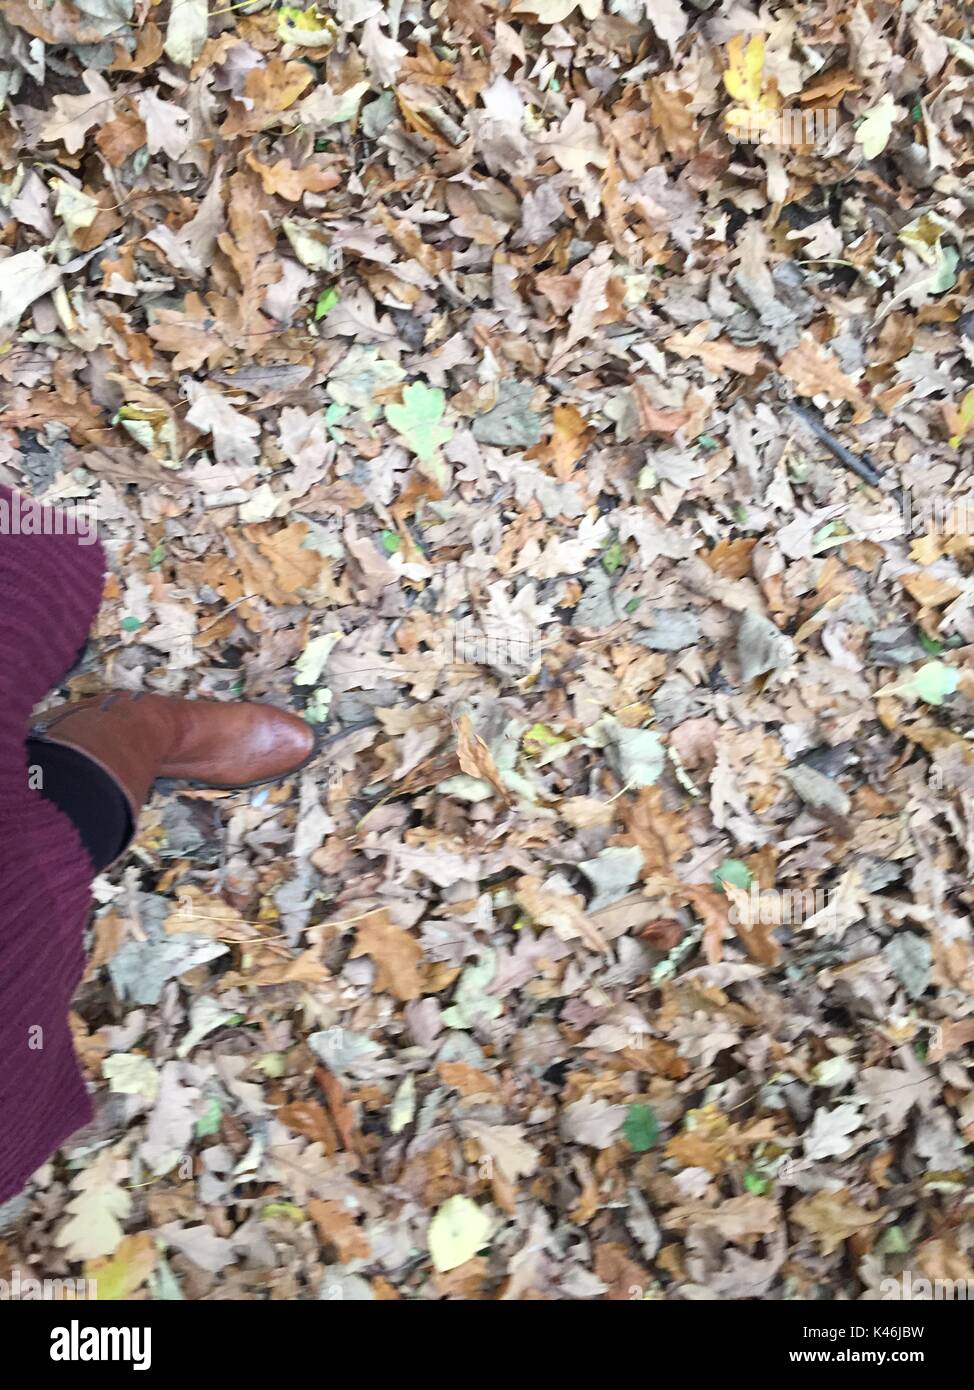 Kicking up the dry leaves, walking through an English woodland in early autumn. Stock Photo